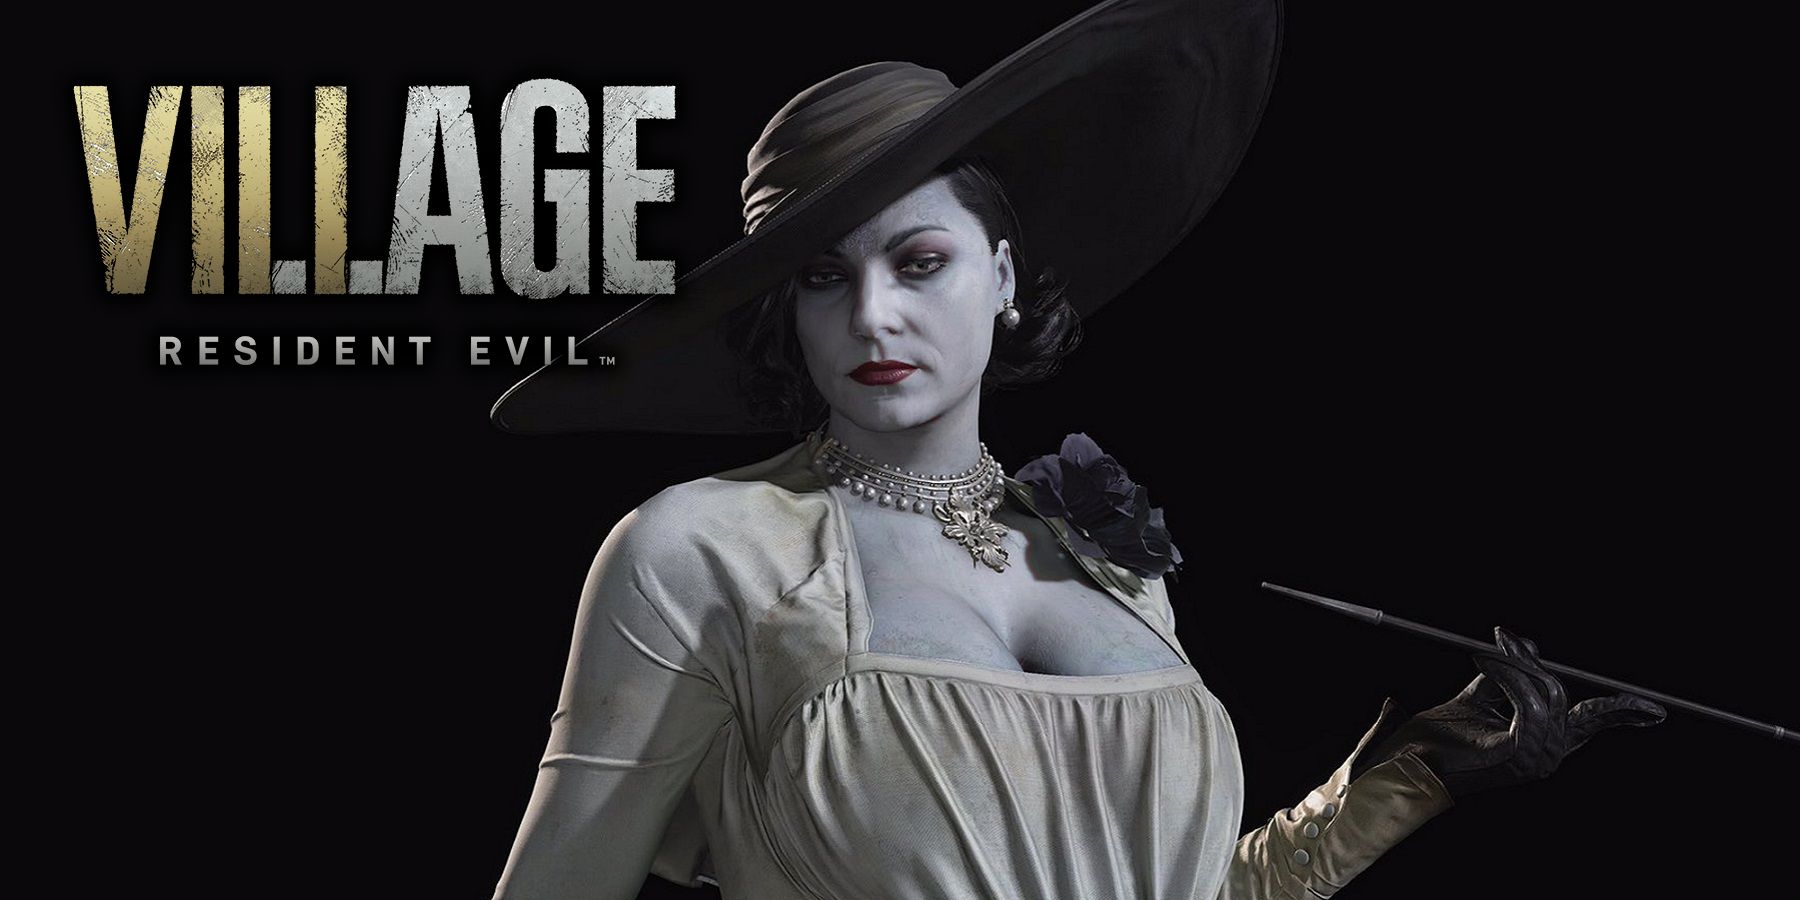 Image of Lady Dimitrescu with the Resident Evil Village logo in the corner.